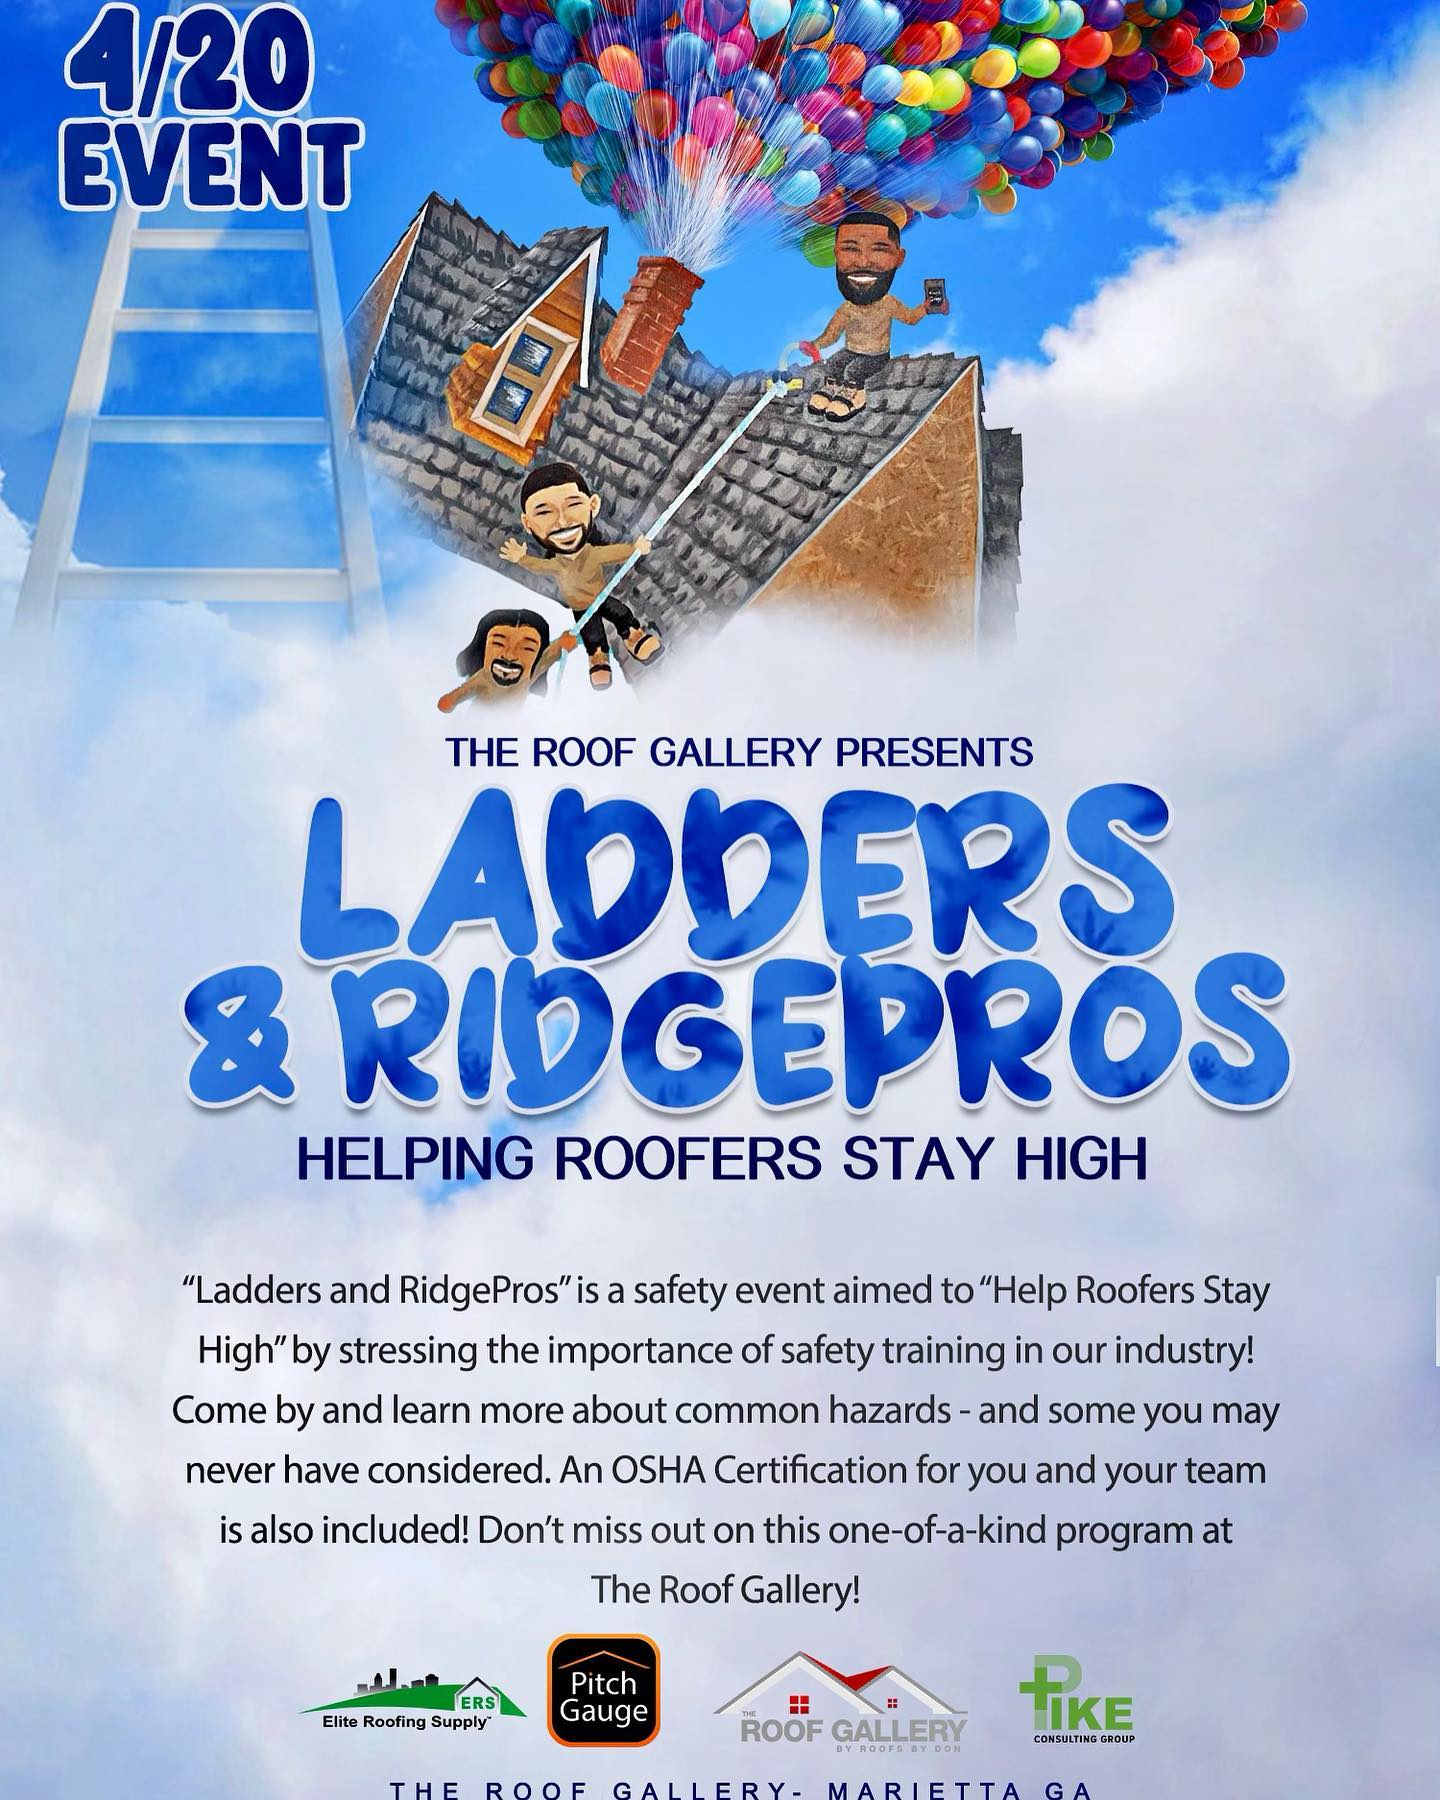 Ladders and RidgePros: Safety Event